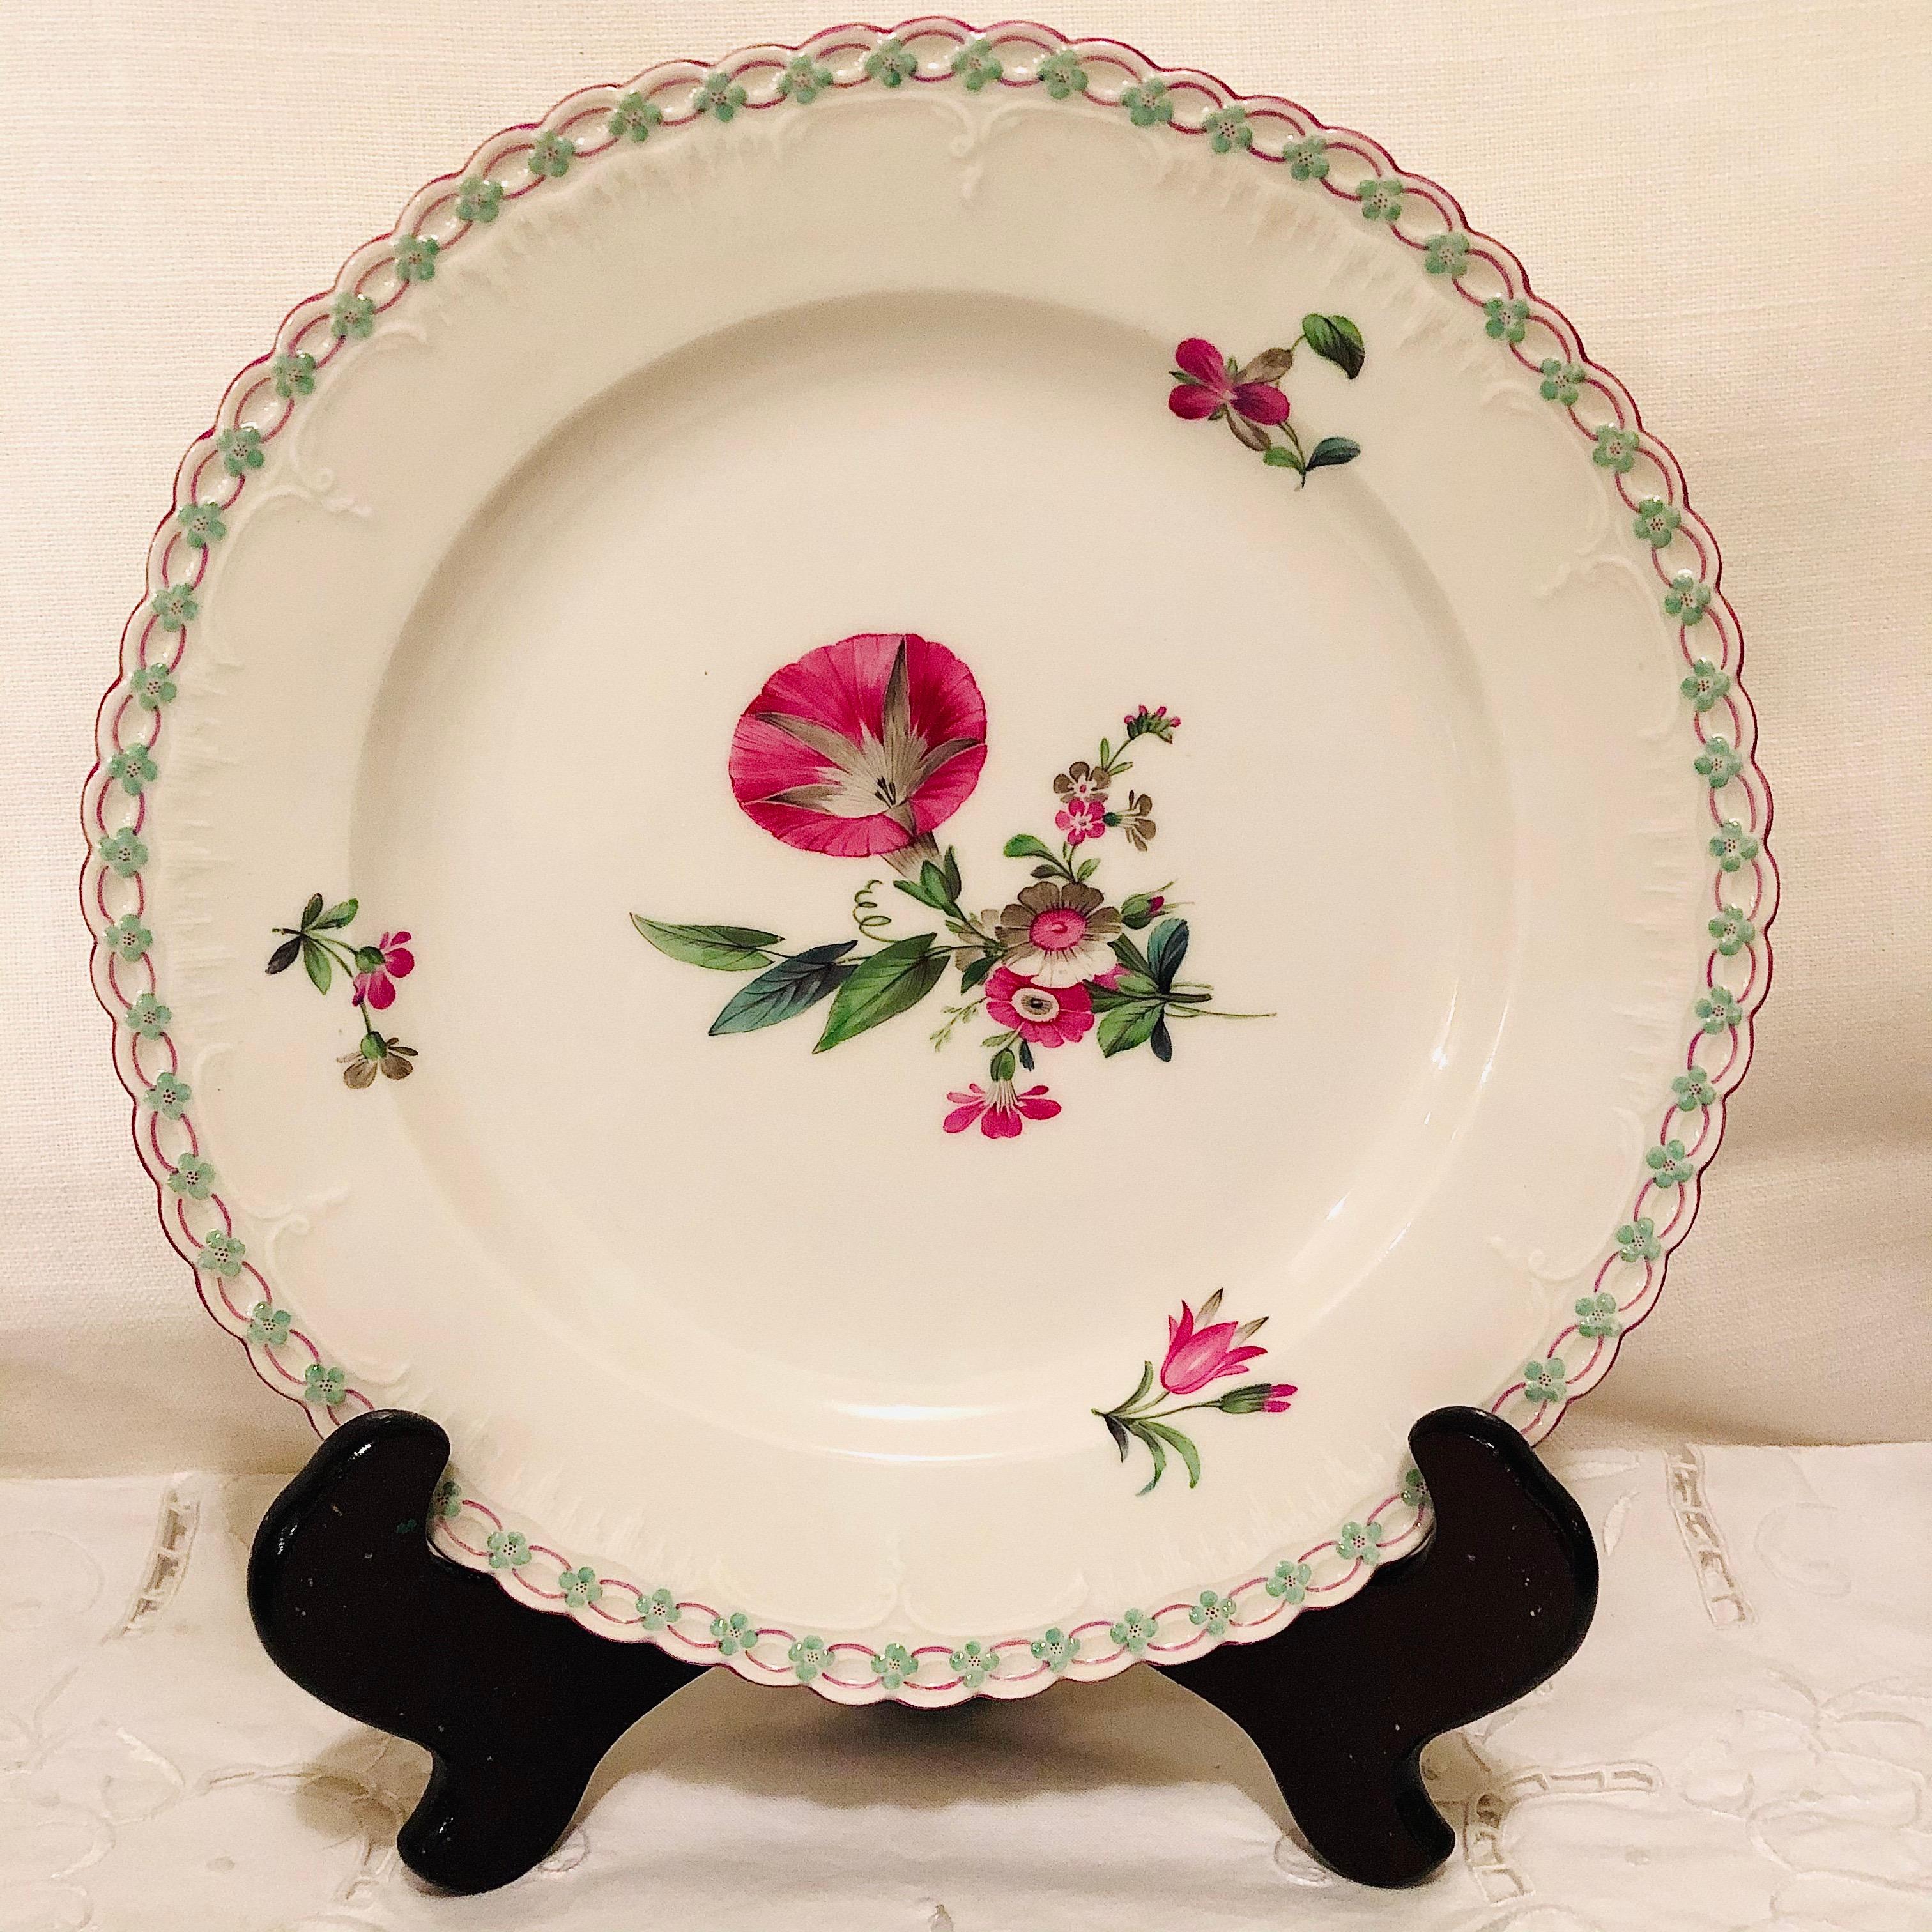 Porcelain Set of 13 KPM Dinner Plates Each Painted Differently With Raised Forget Me Nots